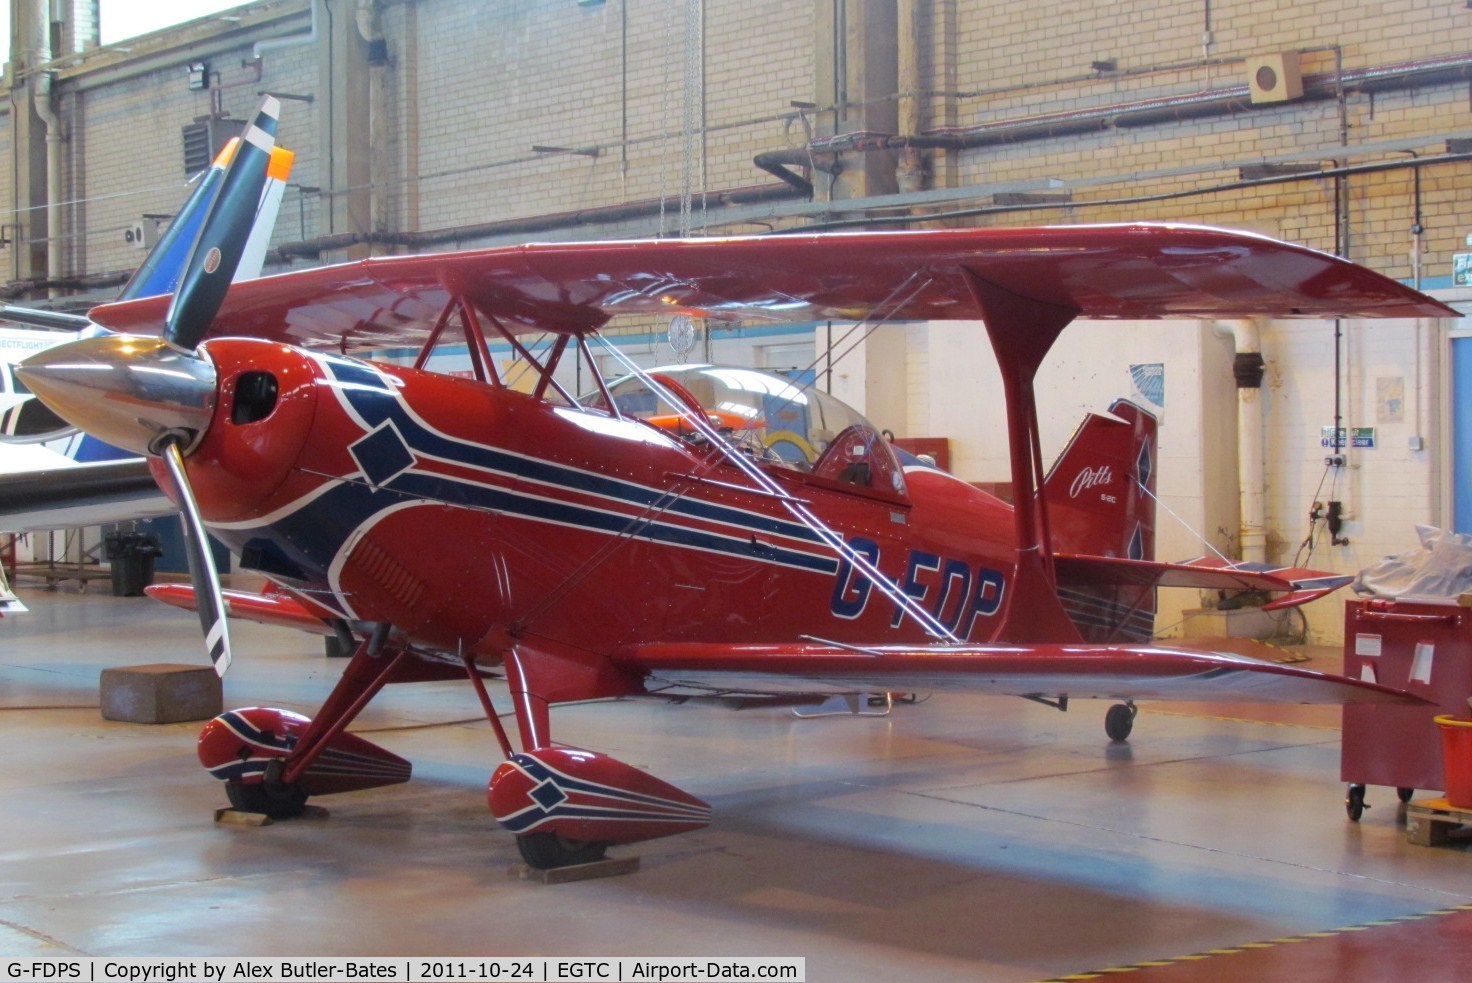 G-FDPS, 2004 Aviat Pitts S-2C Special C/N 6066, Parked in the corner of the hangar